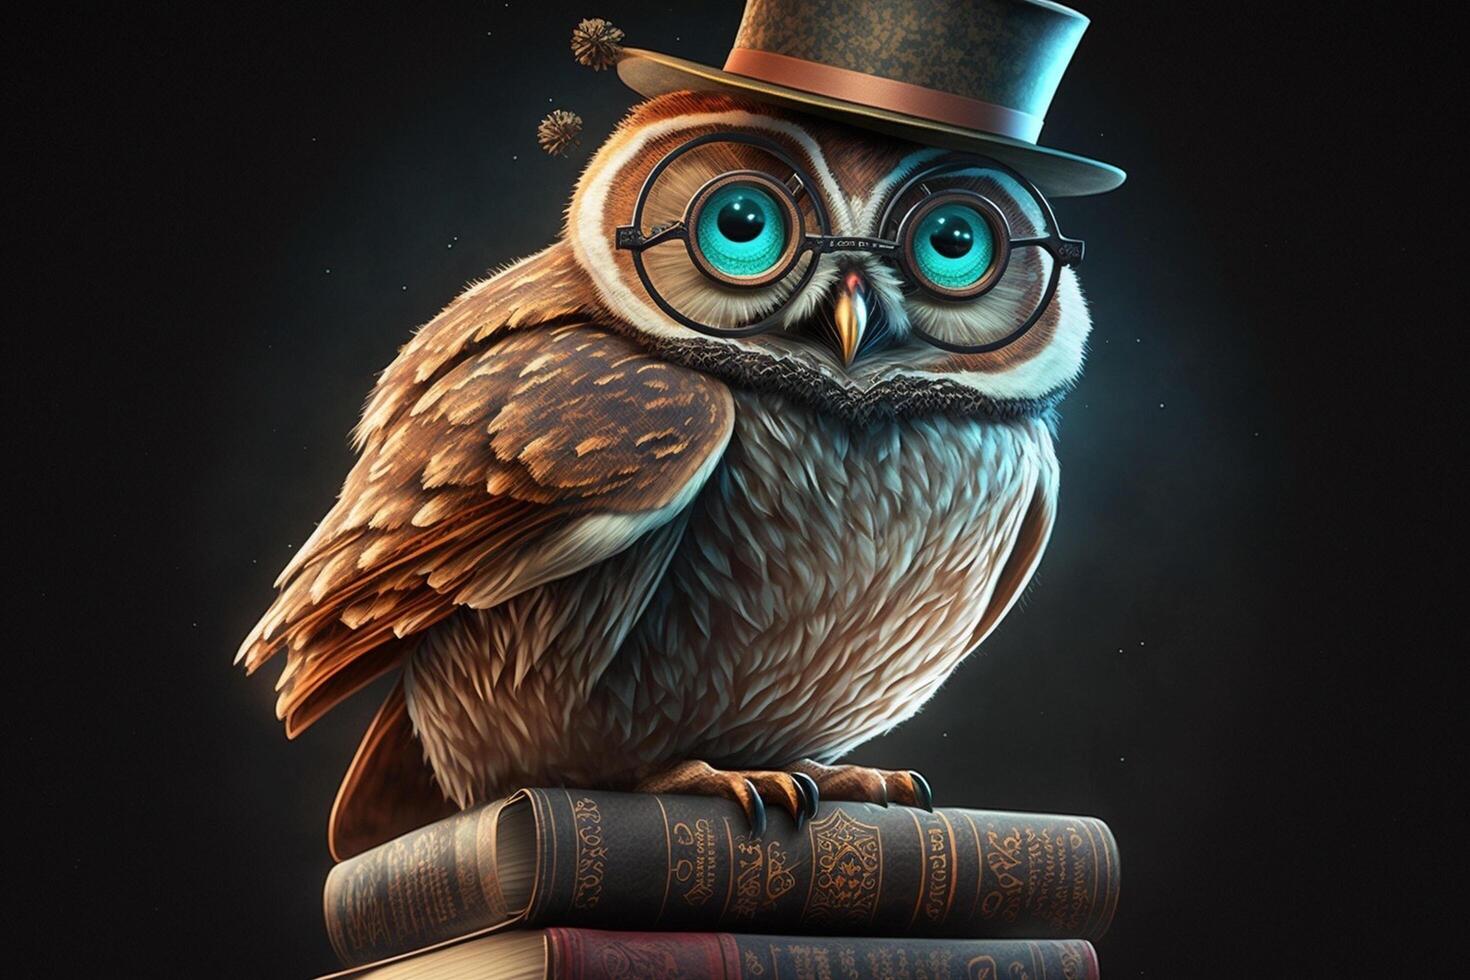 Cunning owl in a hat and glasses sits on books photo